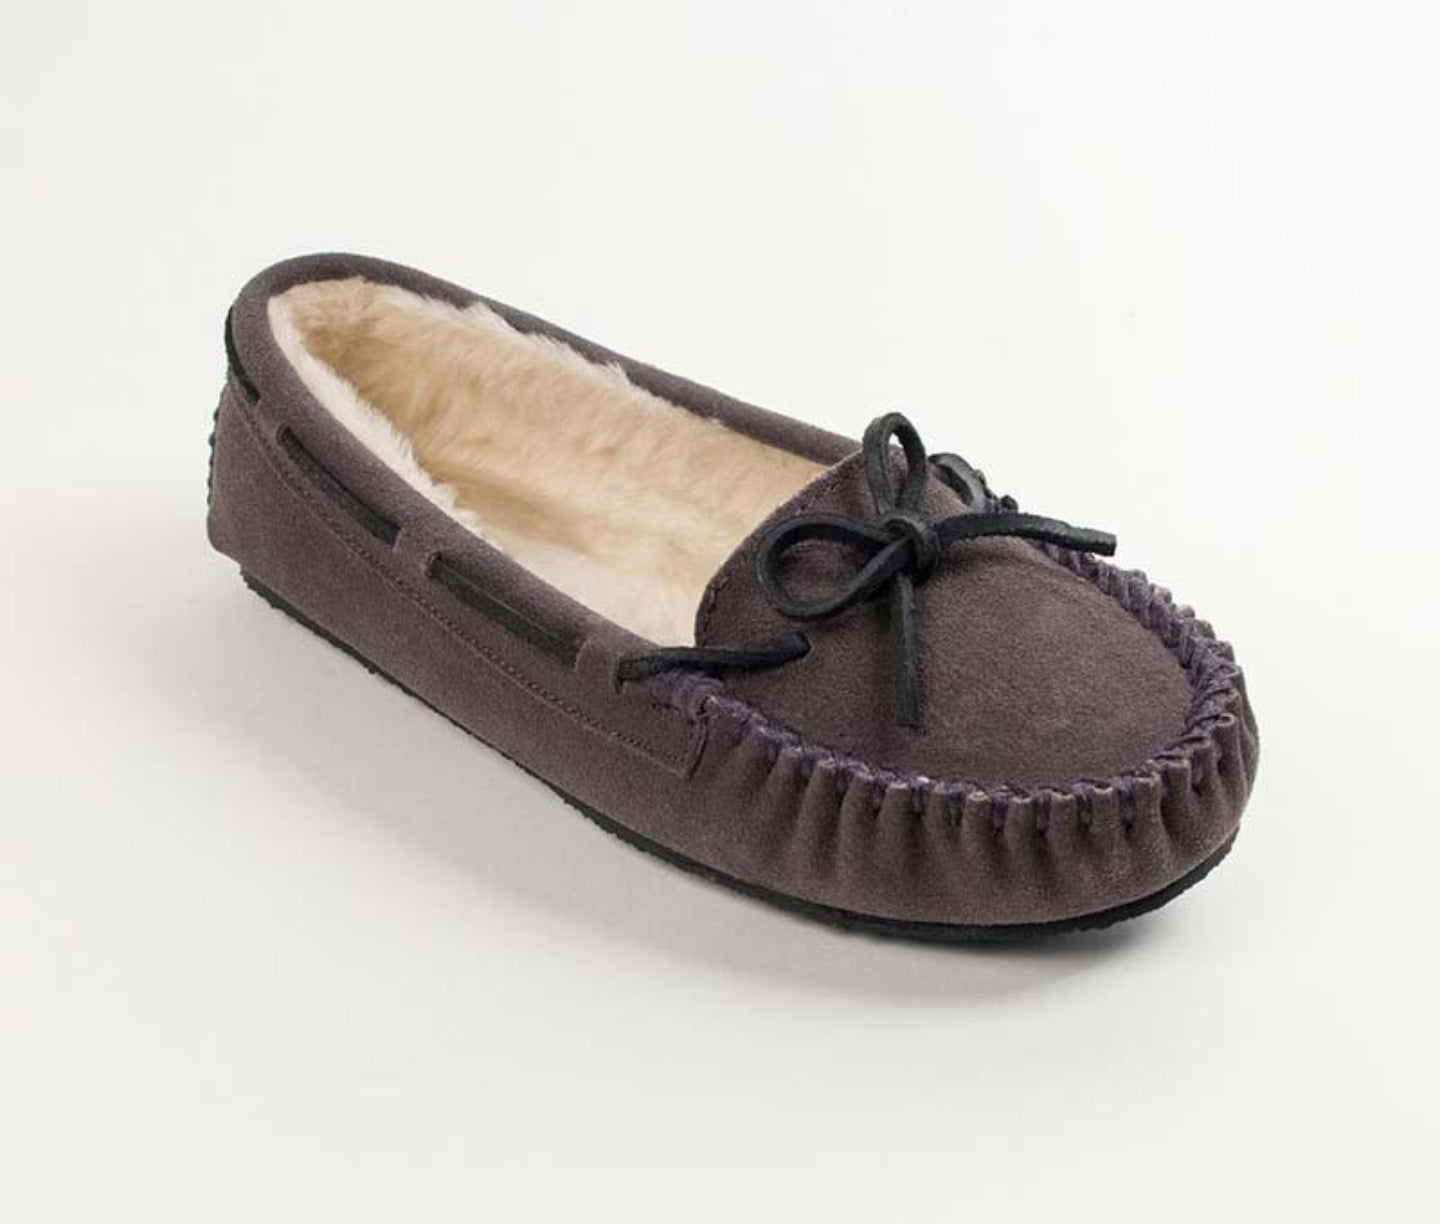 Cally Slipper in Grey from 3/4 Angle View